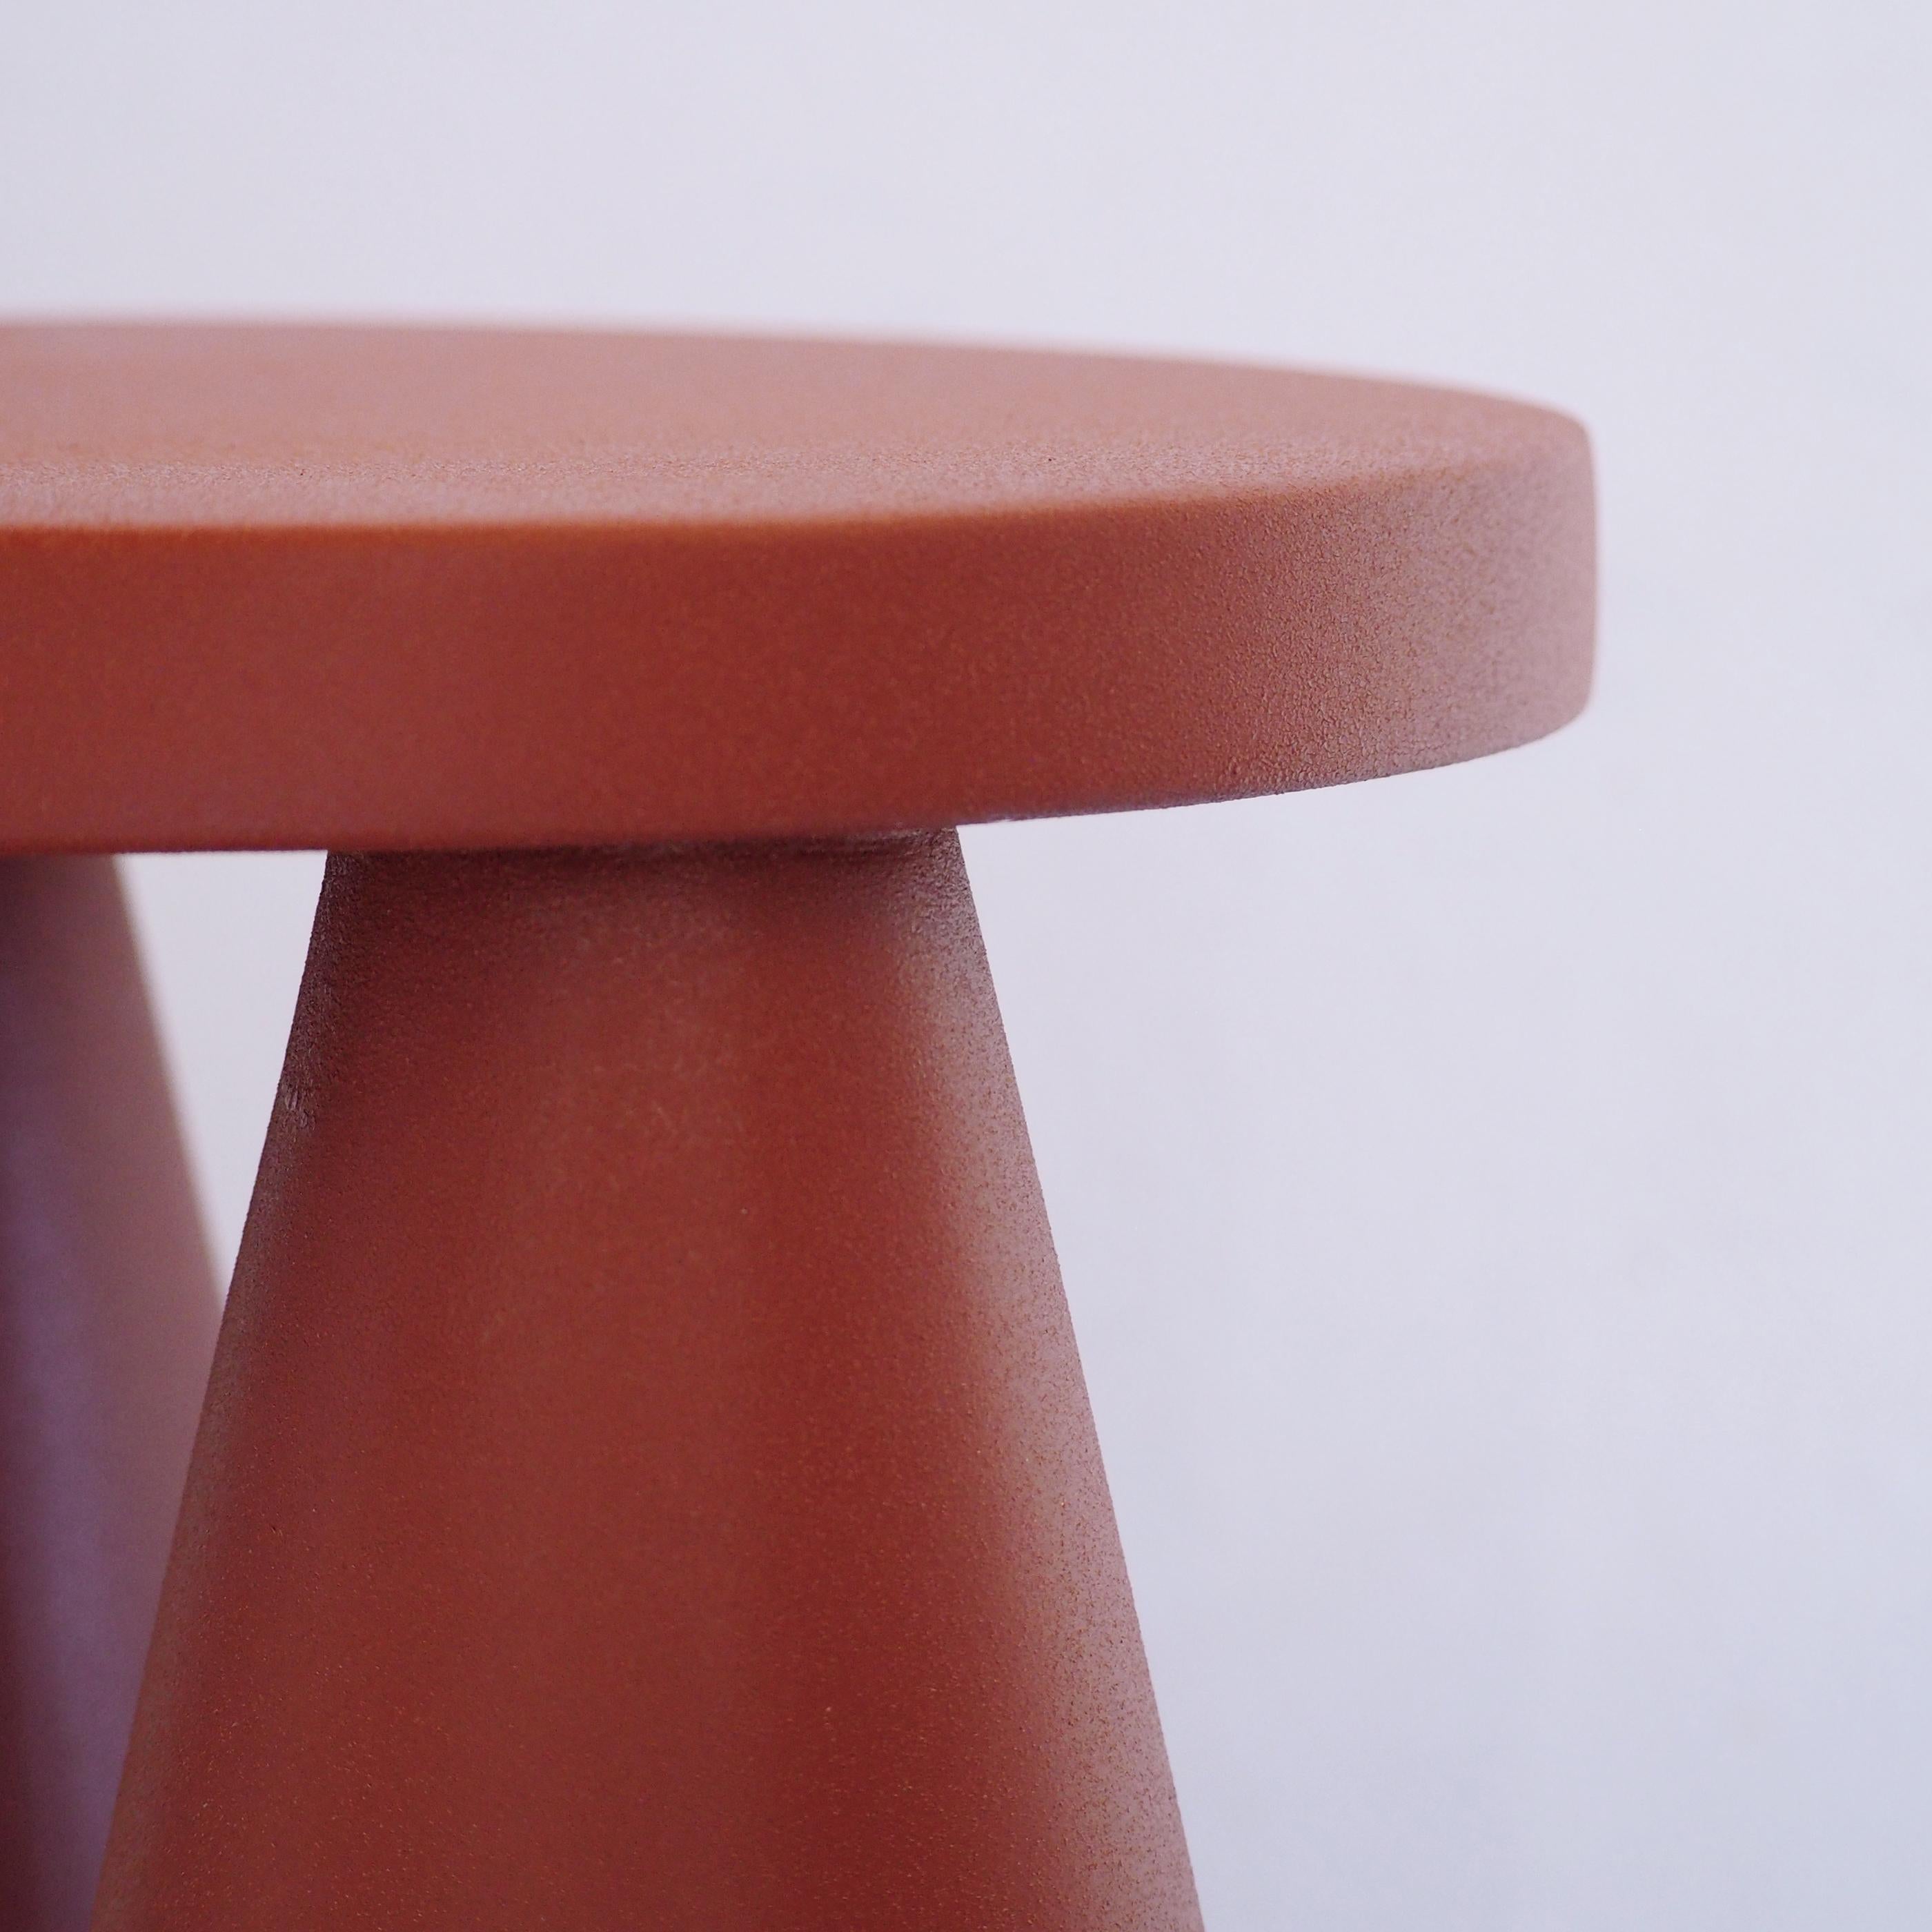 Isola/ Ceramic Conic Side Table/ Cotto, Designed by Cara/Davide for Portego For Sale 1